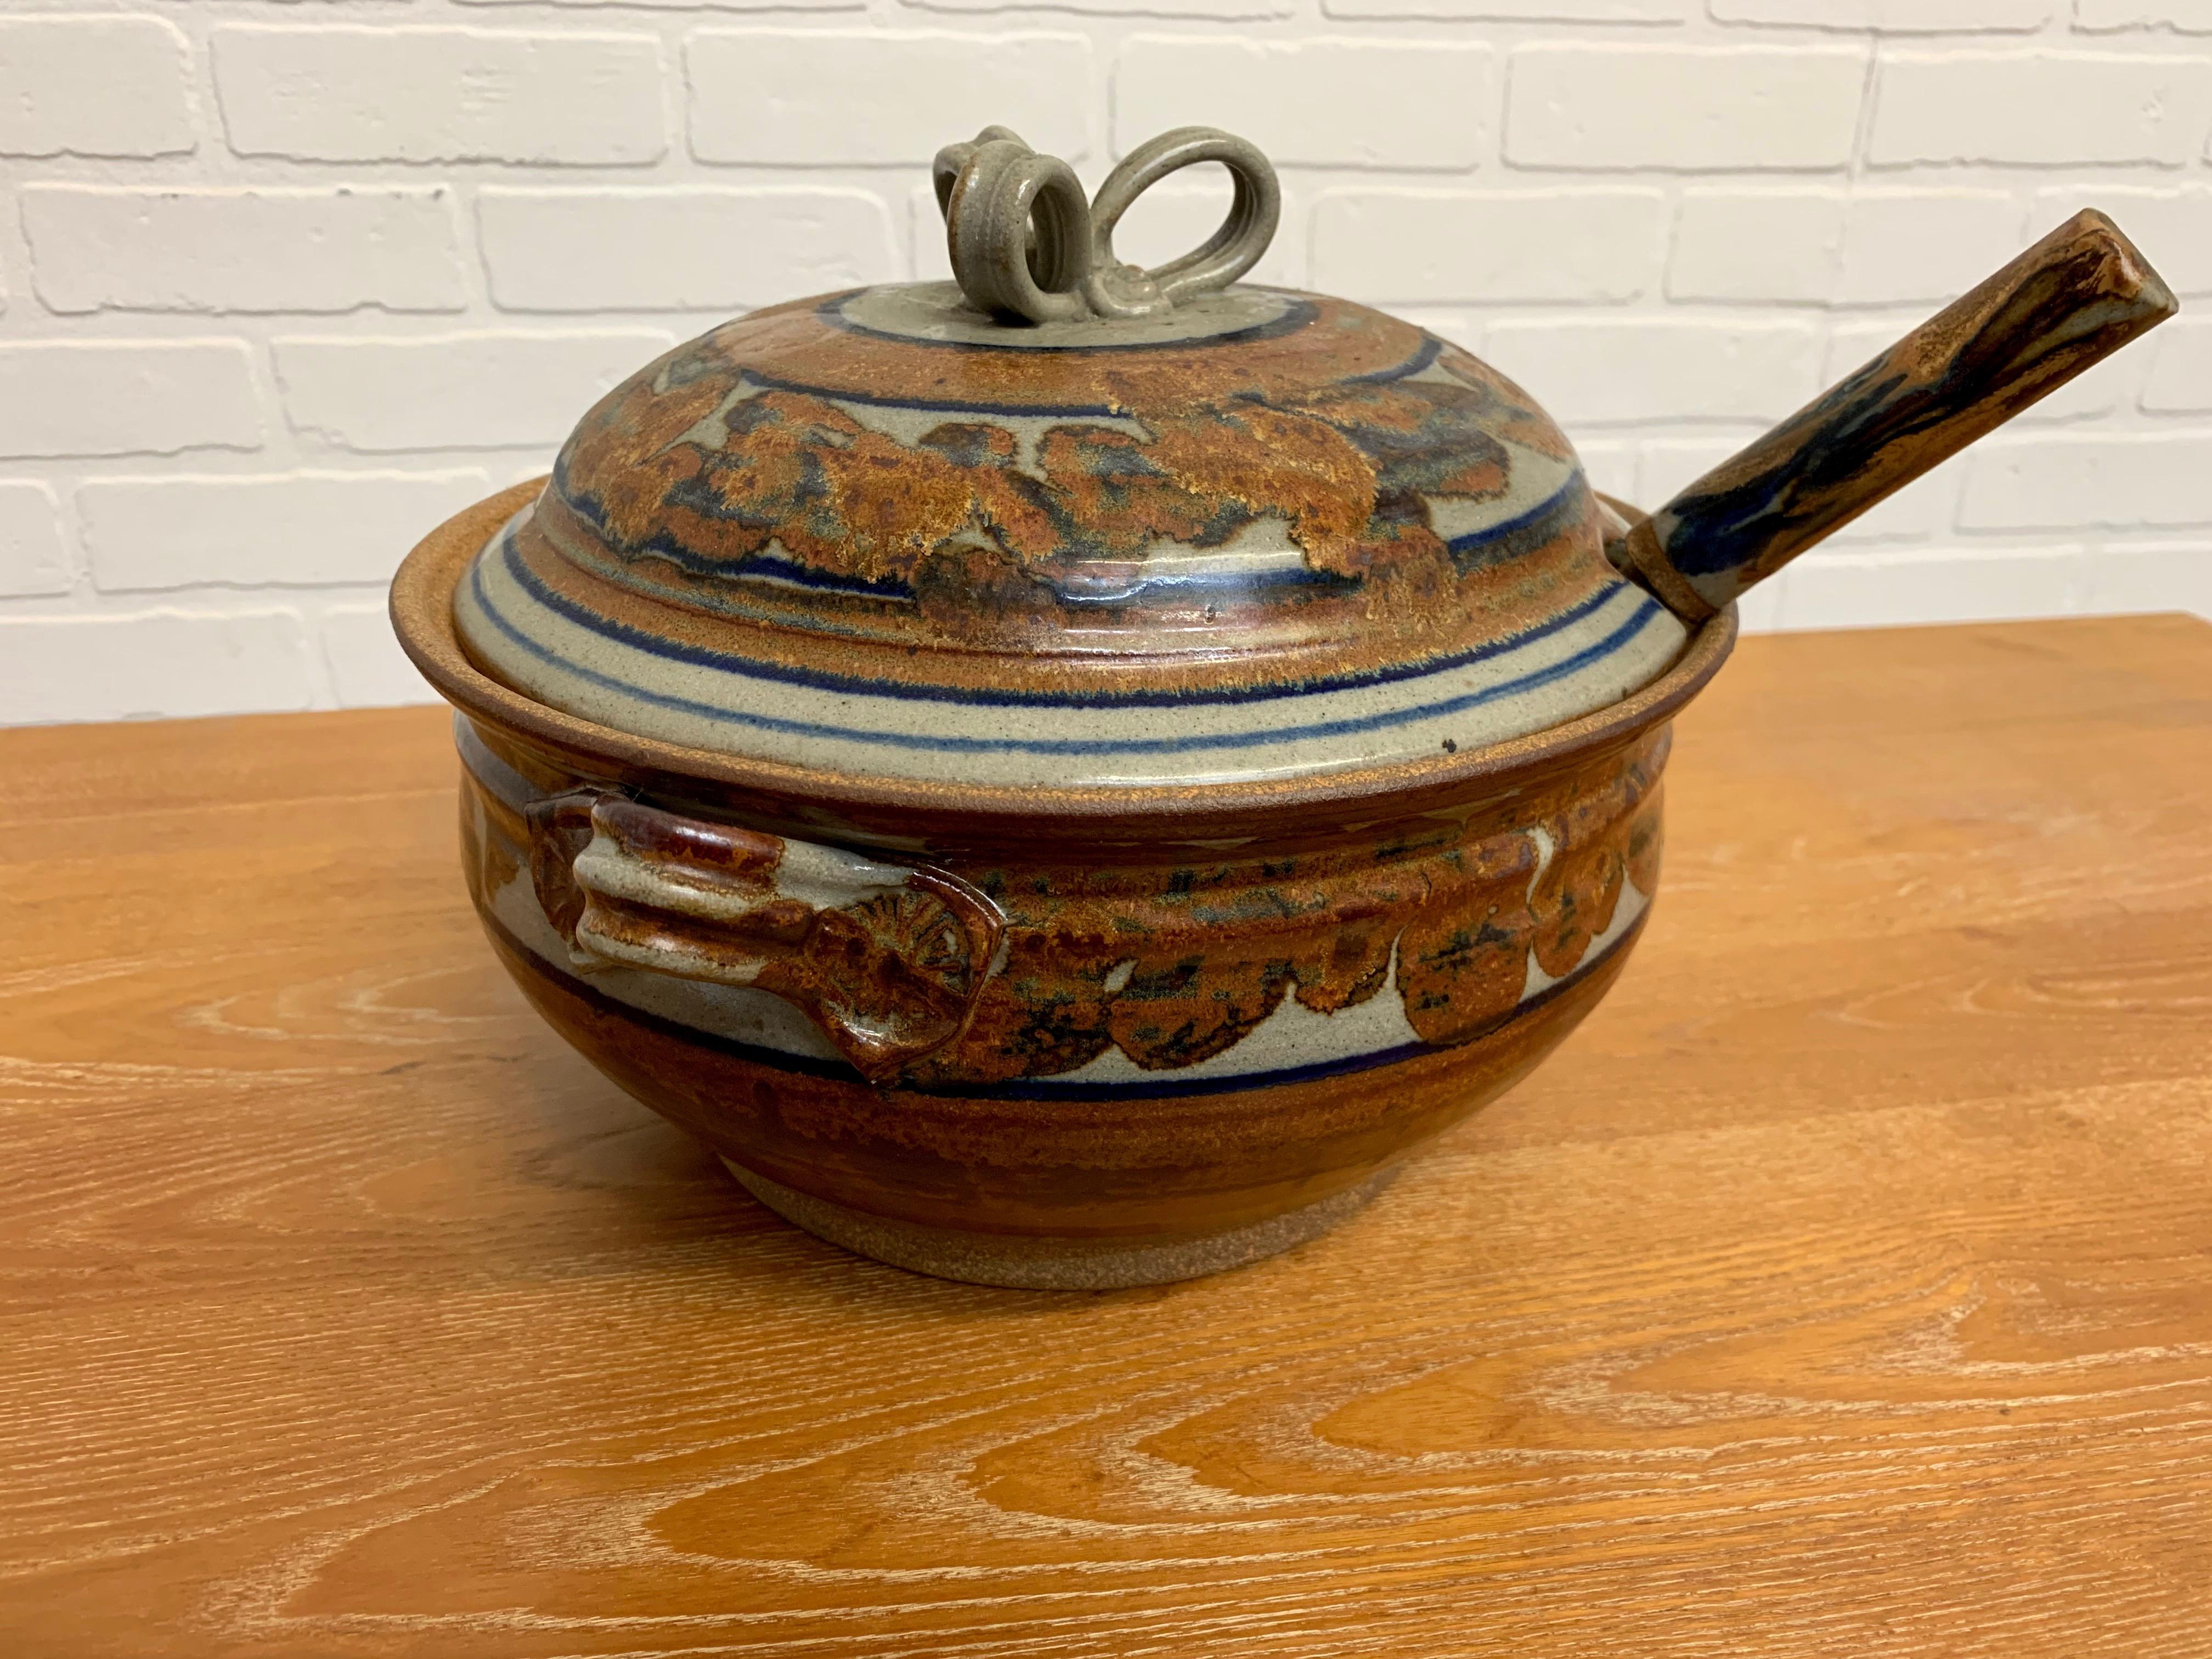 Stoneware soup tureen with lid and ladle. The ladle is a combination of stoneware with a wood stem.